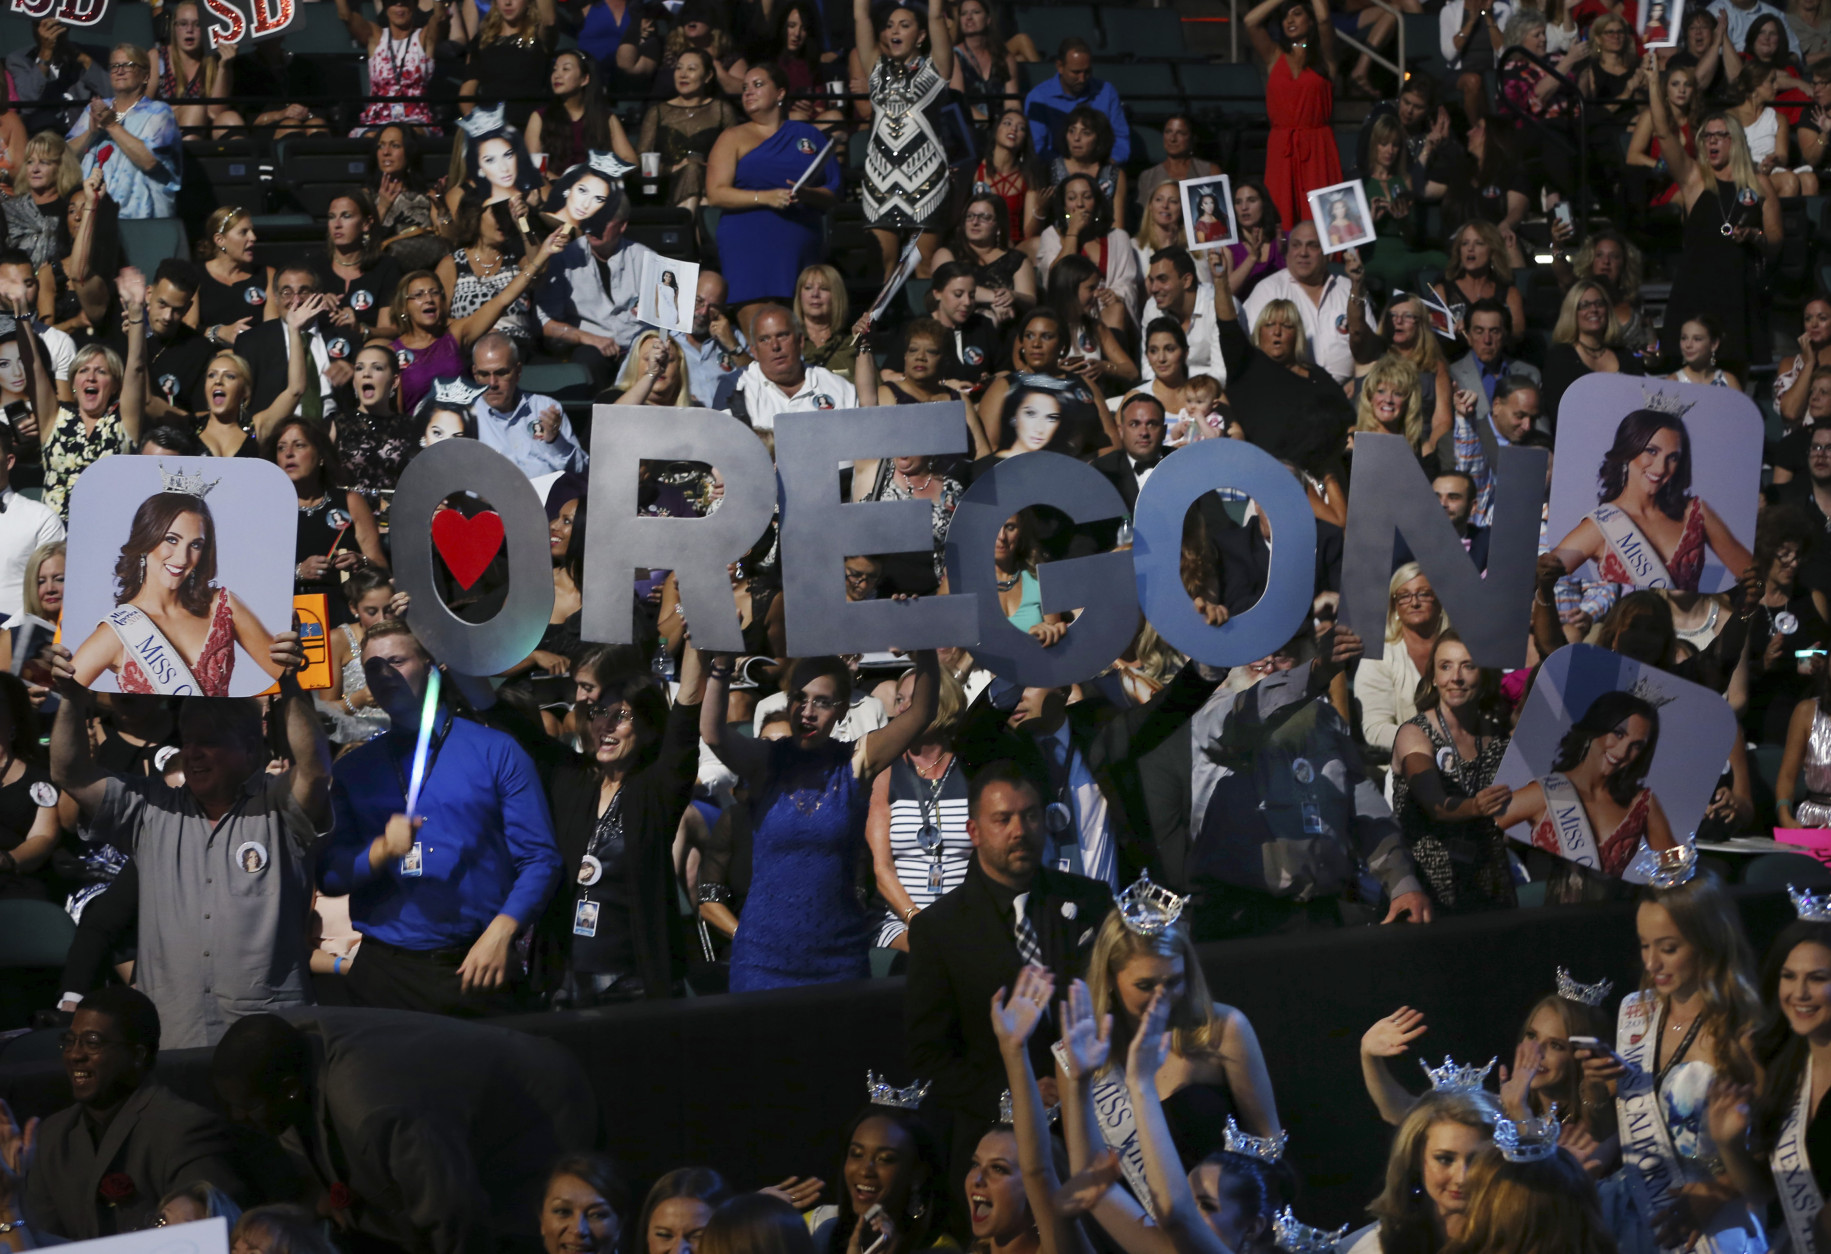 Fans of Miss Oregon Alexis Mather, hold up a sign during the Miss America 2017 pageant, Sunday, Sept. 11, 2016, in Atlantic City, N.J. (AP Photo/Mel Evans)